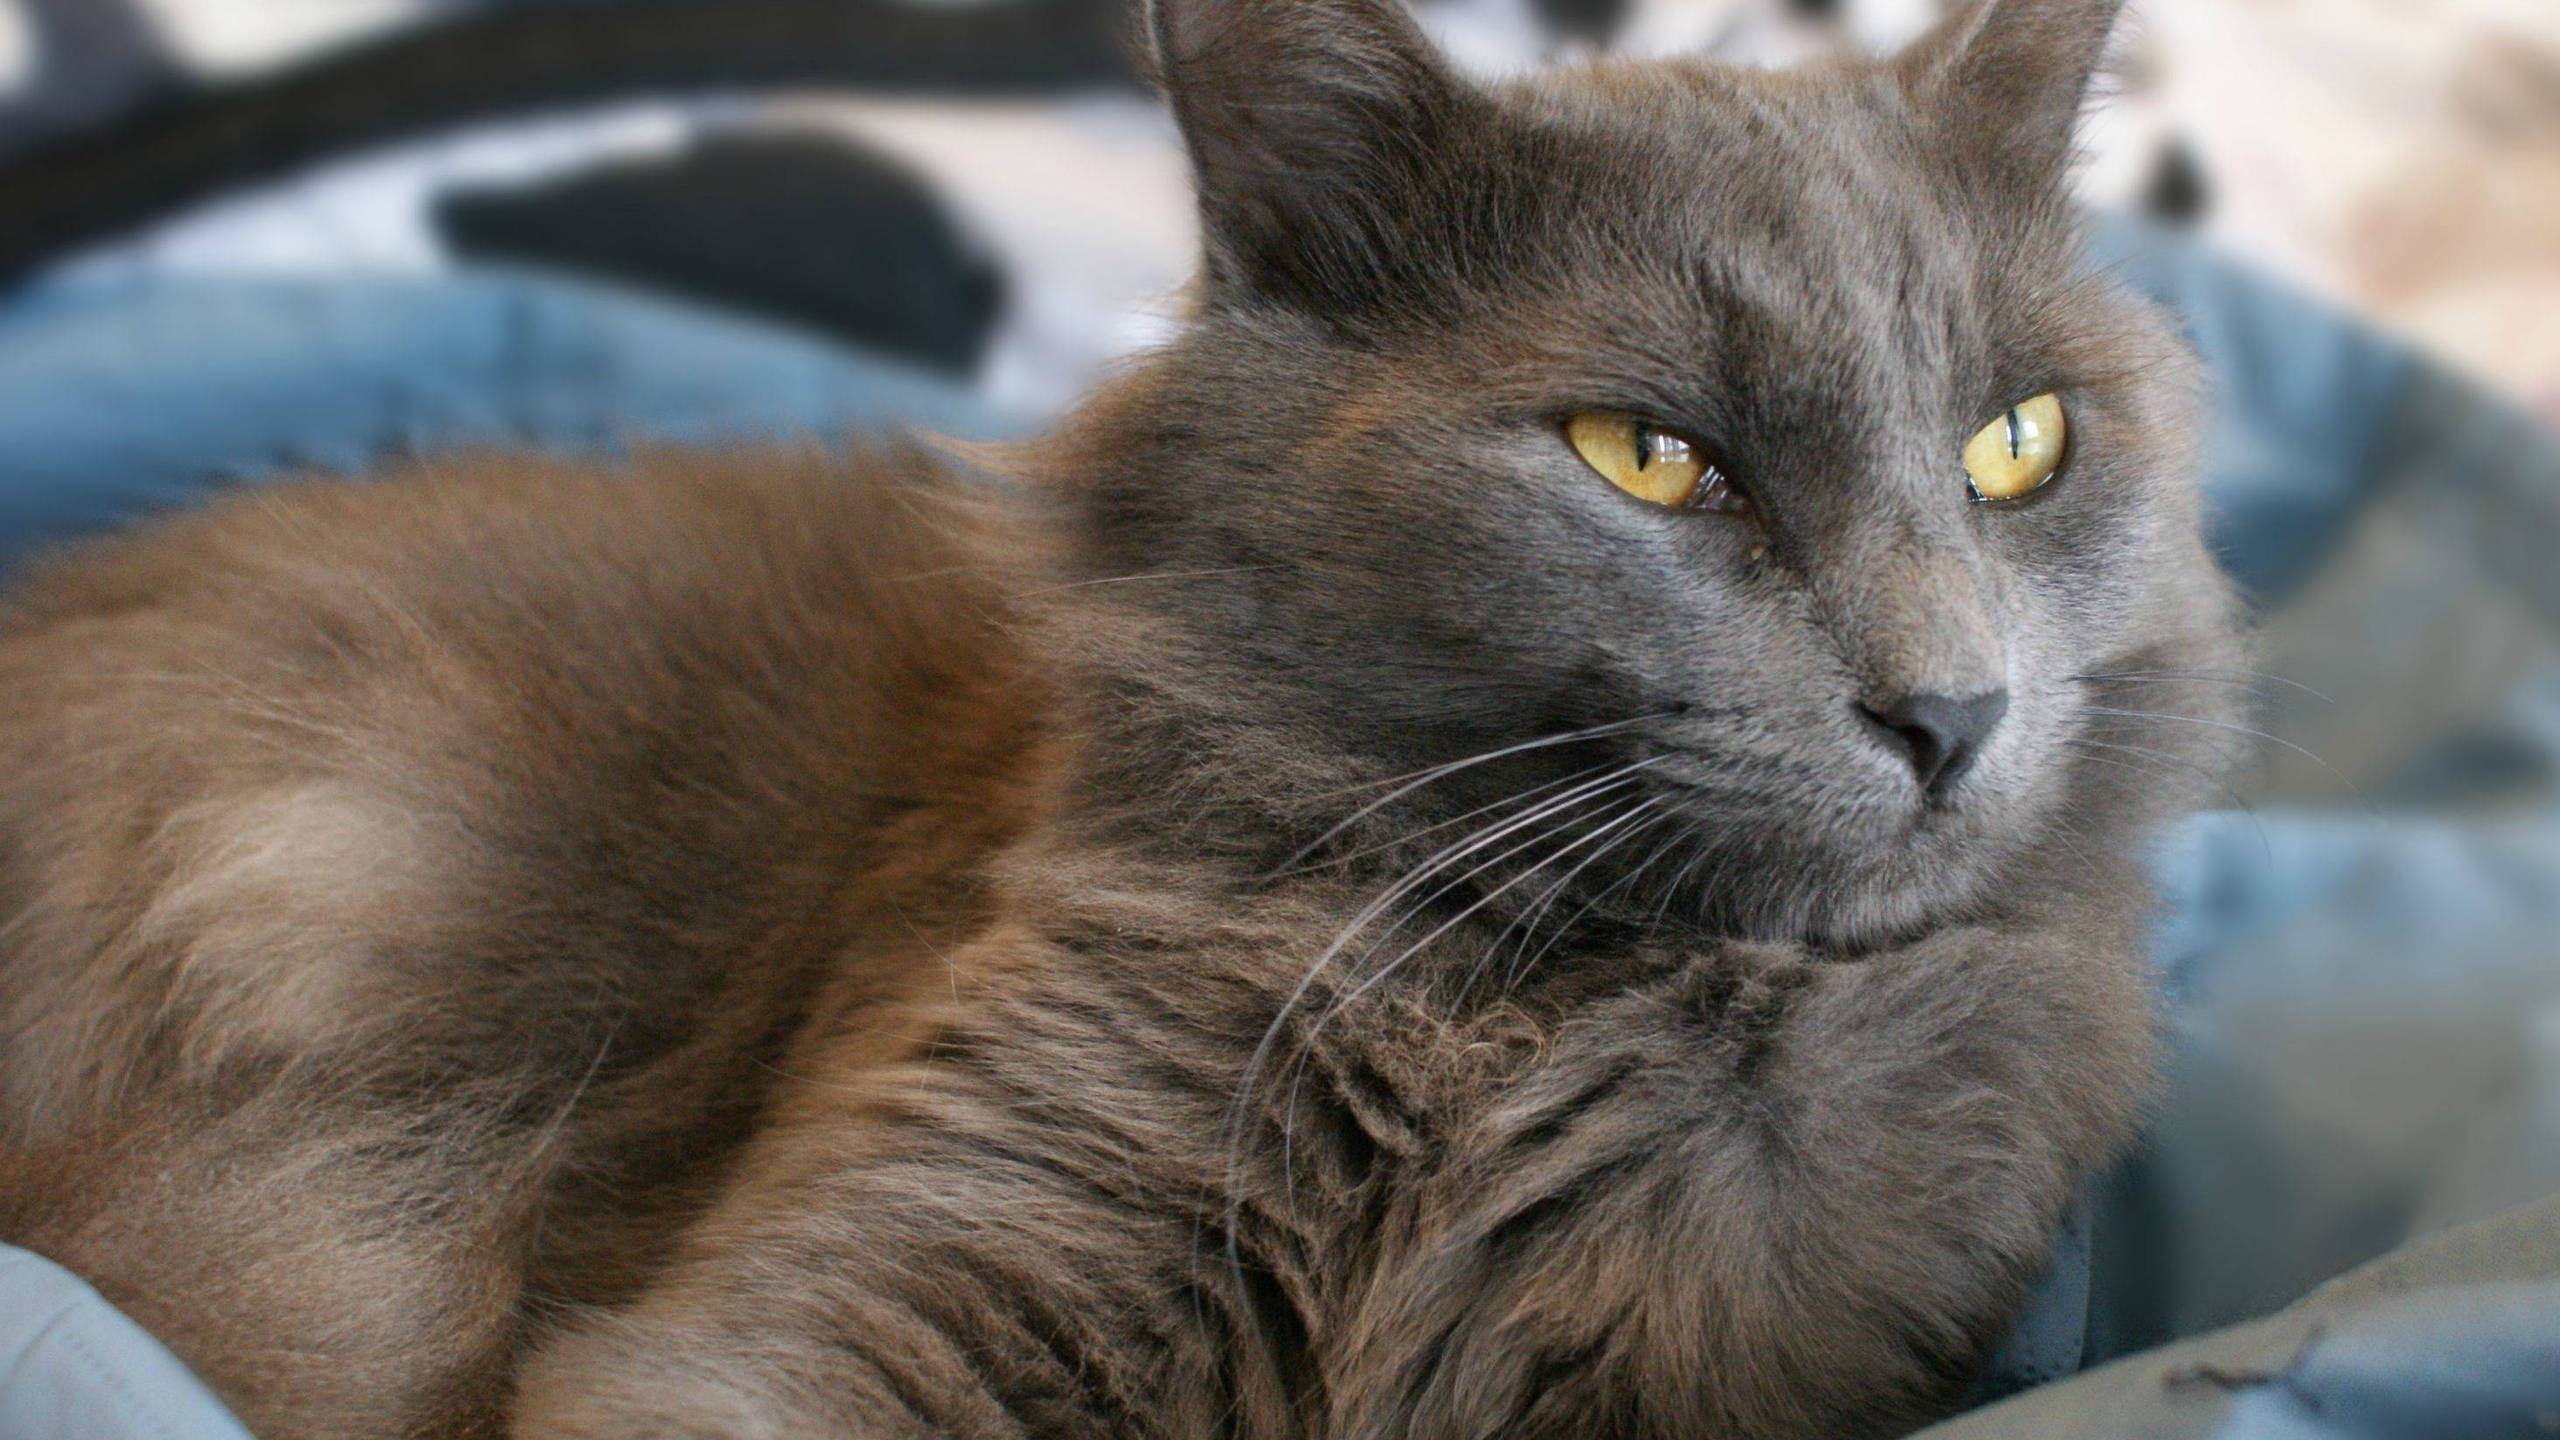 Yellow Eyes Nebelung Cat for 2560x1440 HDTV resolution